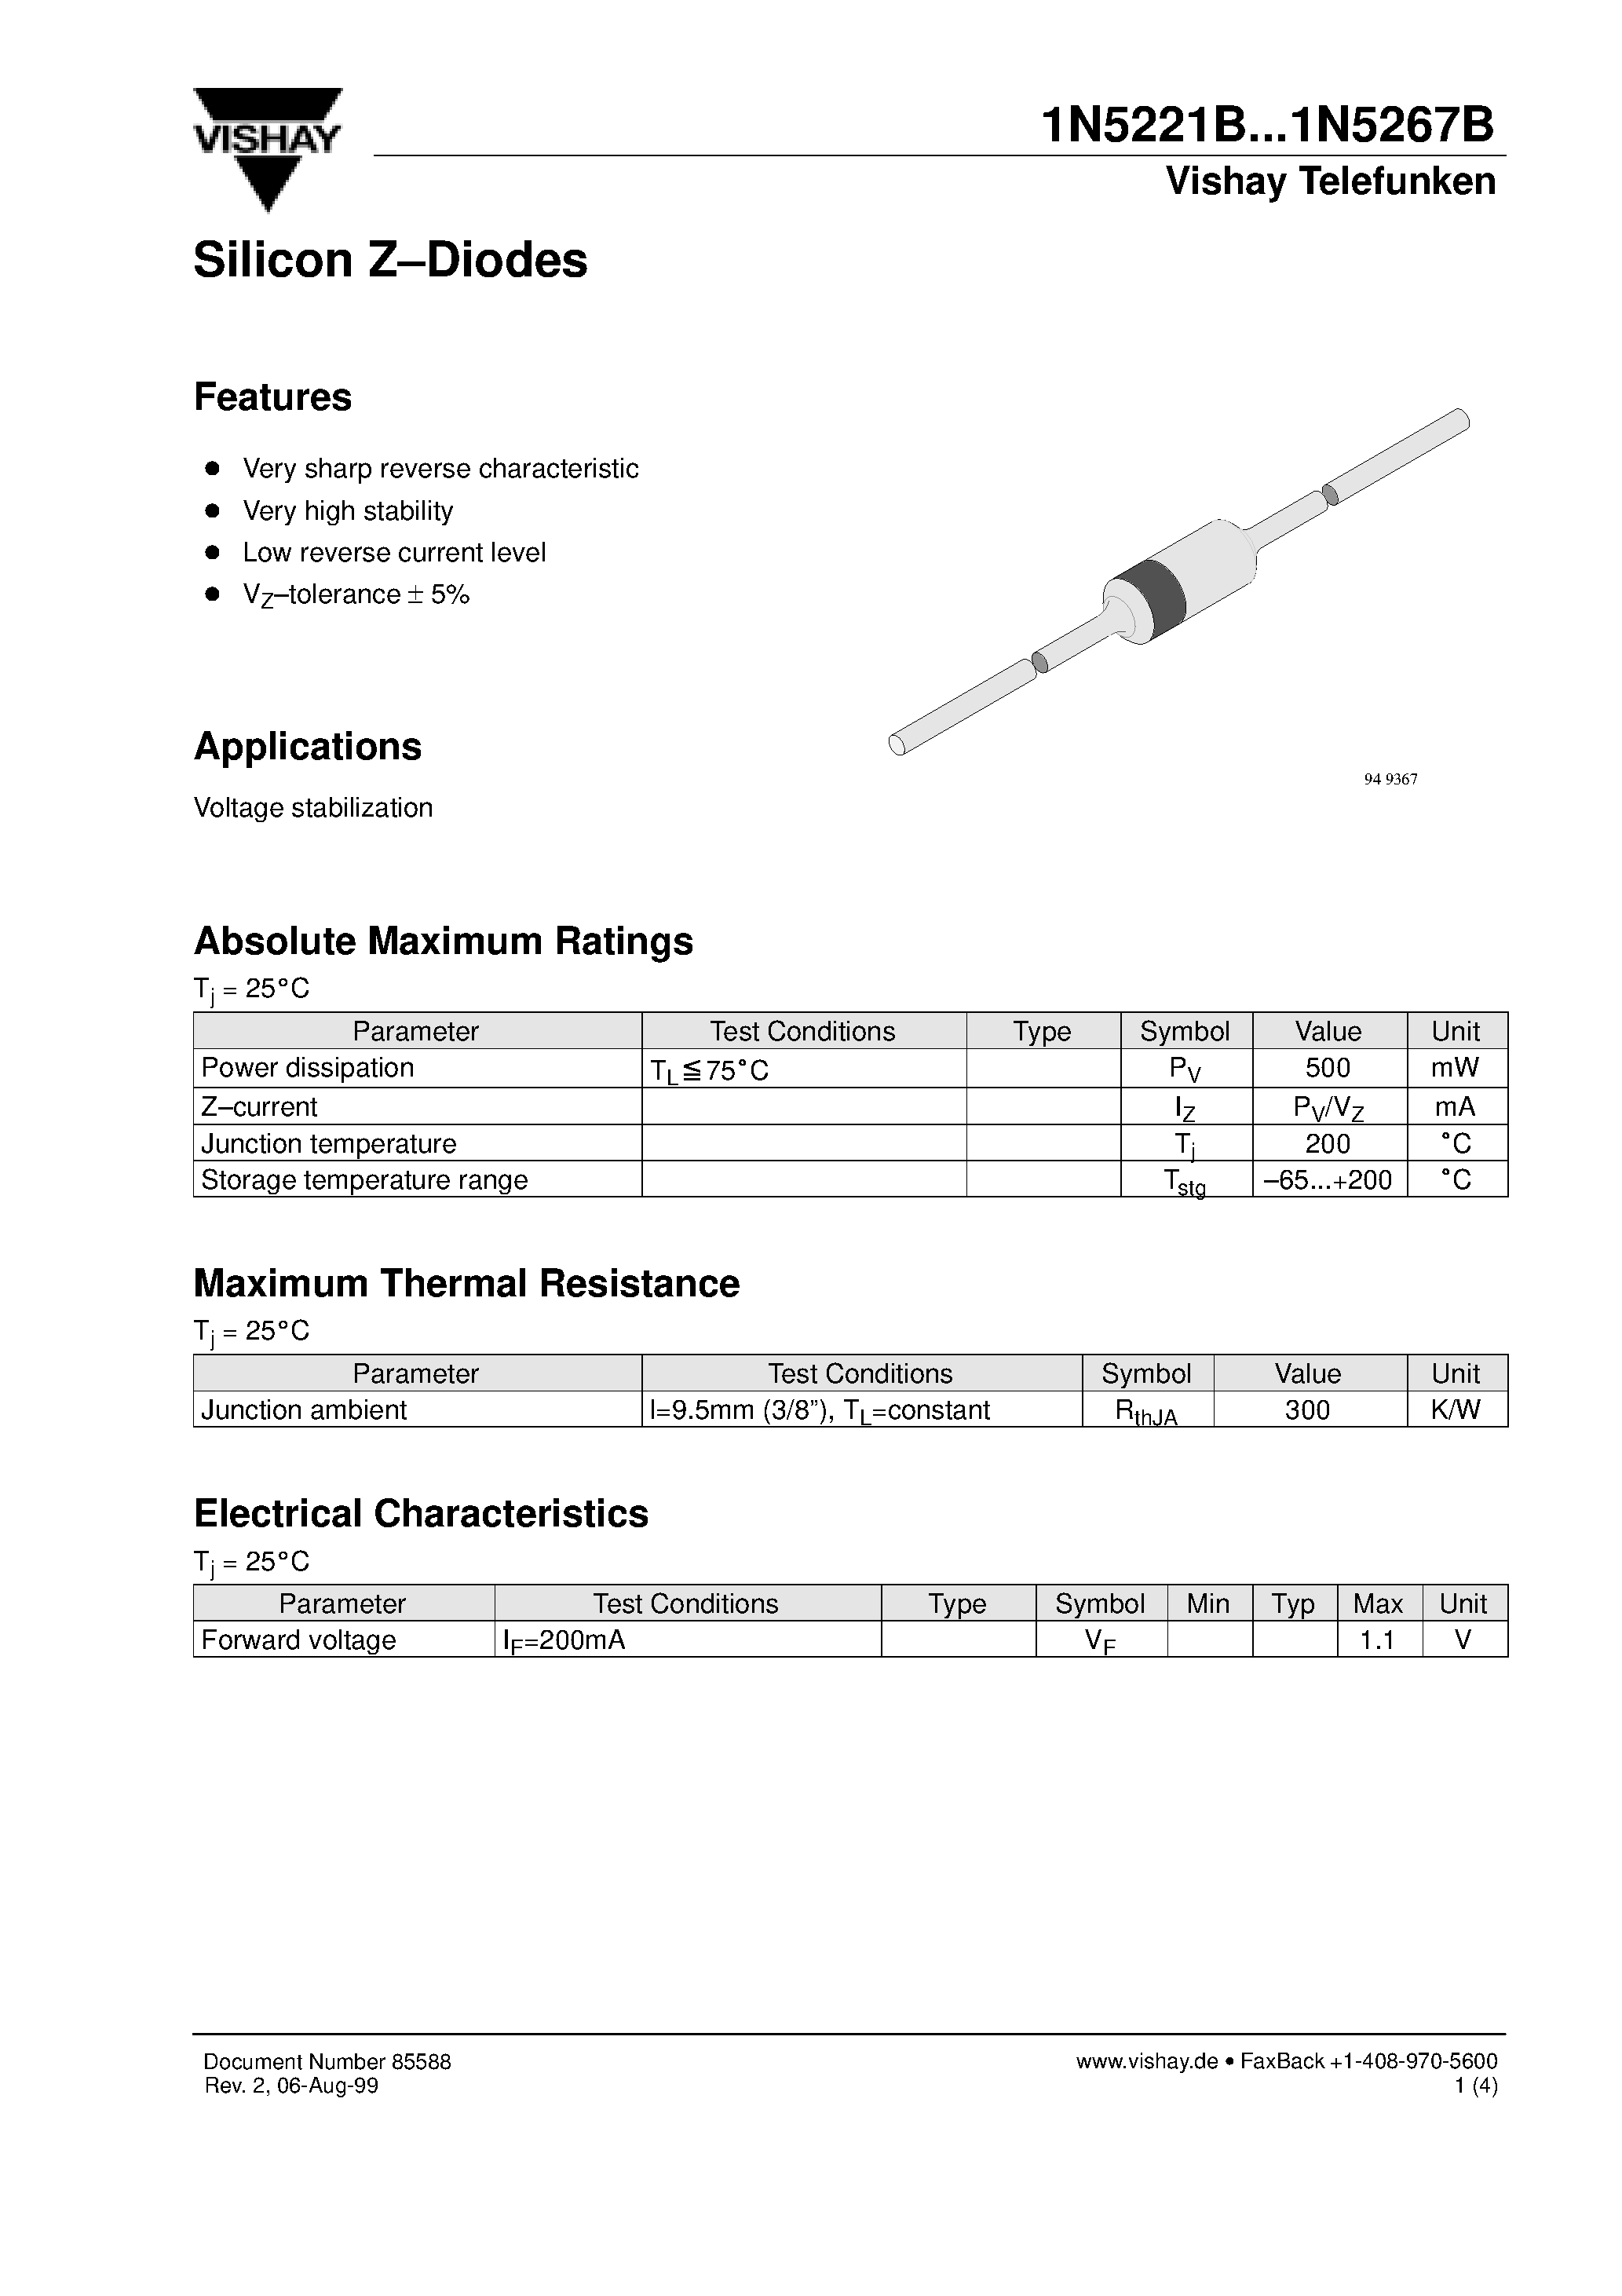 Datasheet 1N5224B - Silicon Z-Diodes page 1